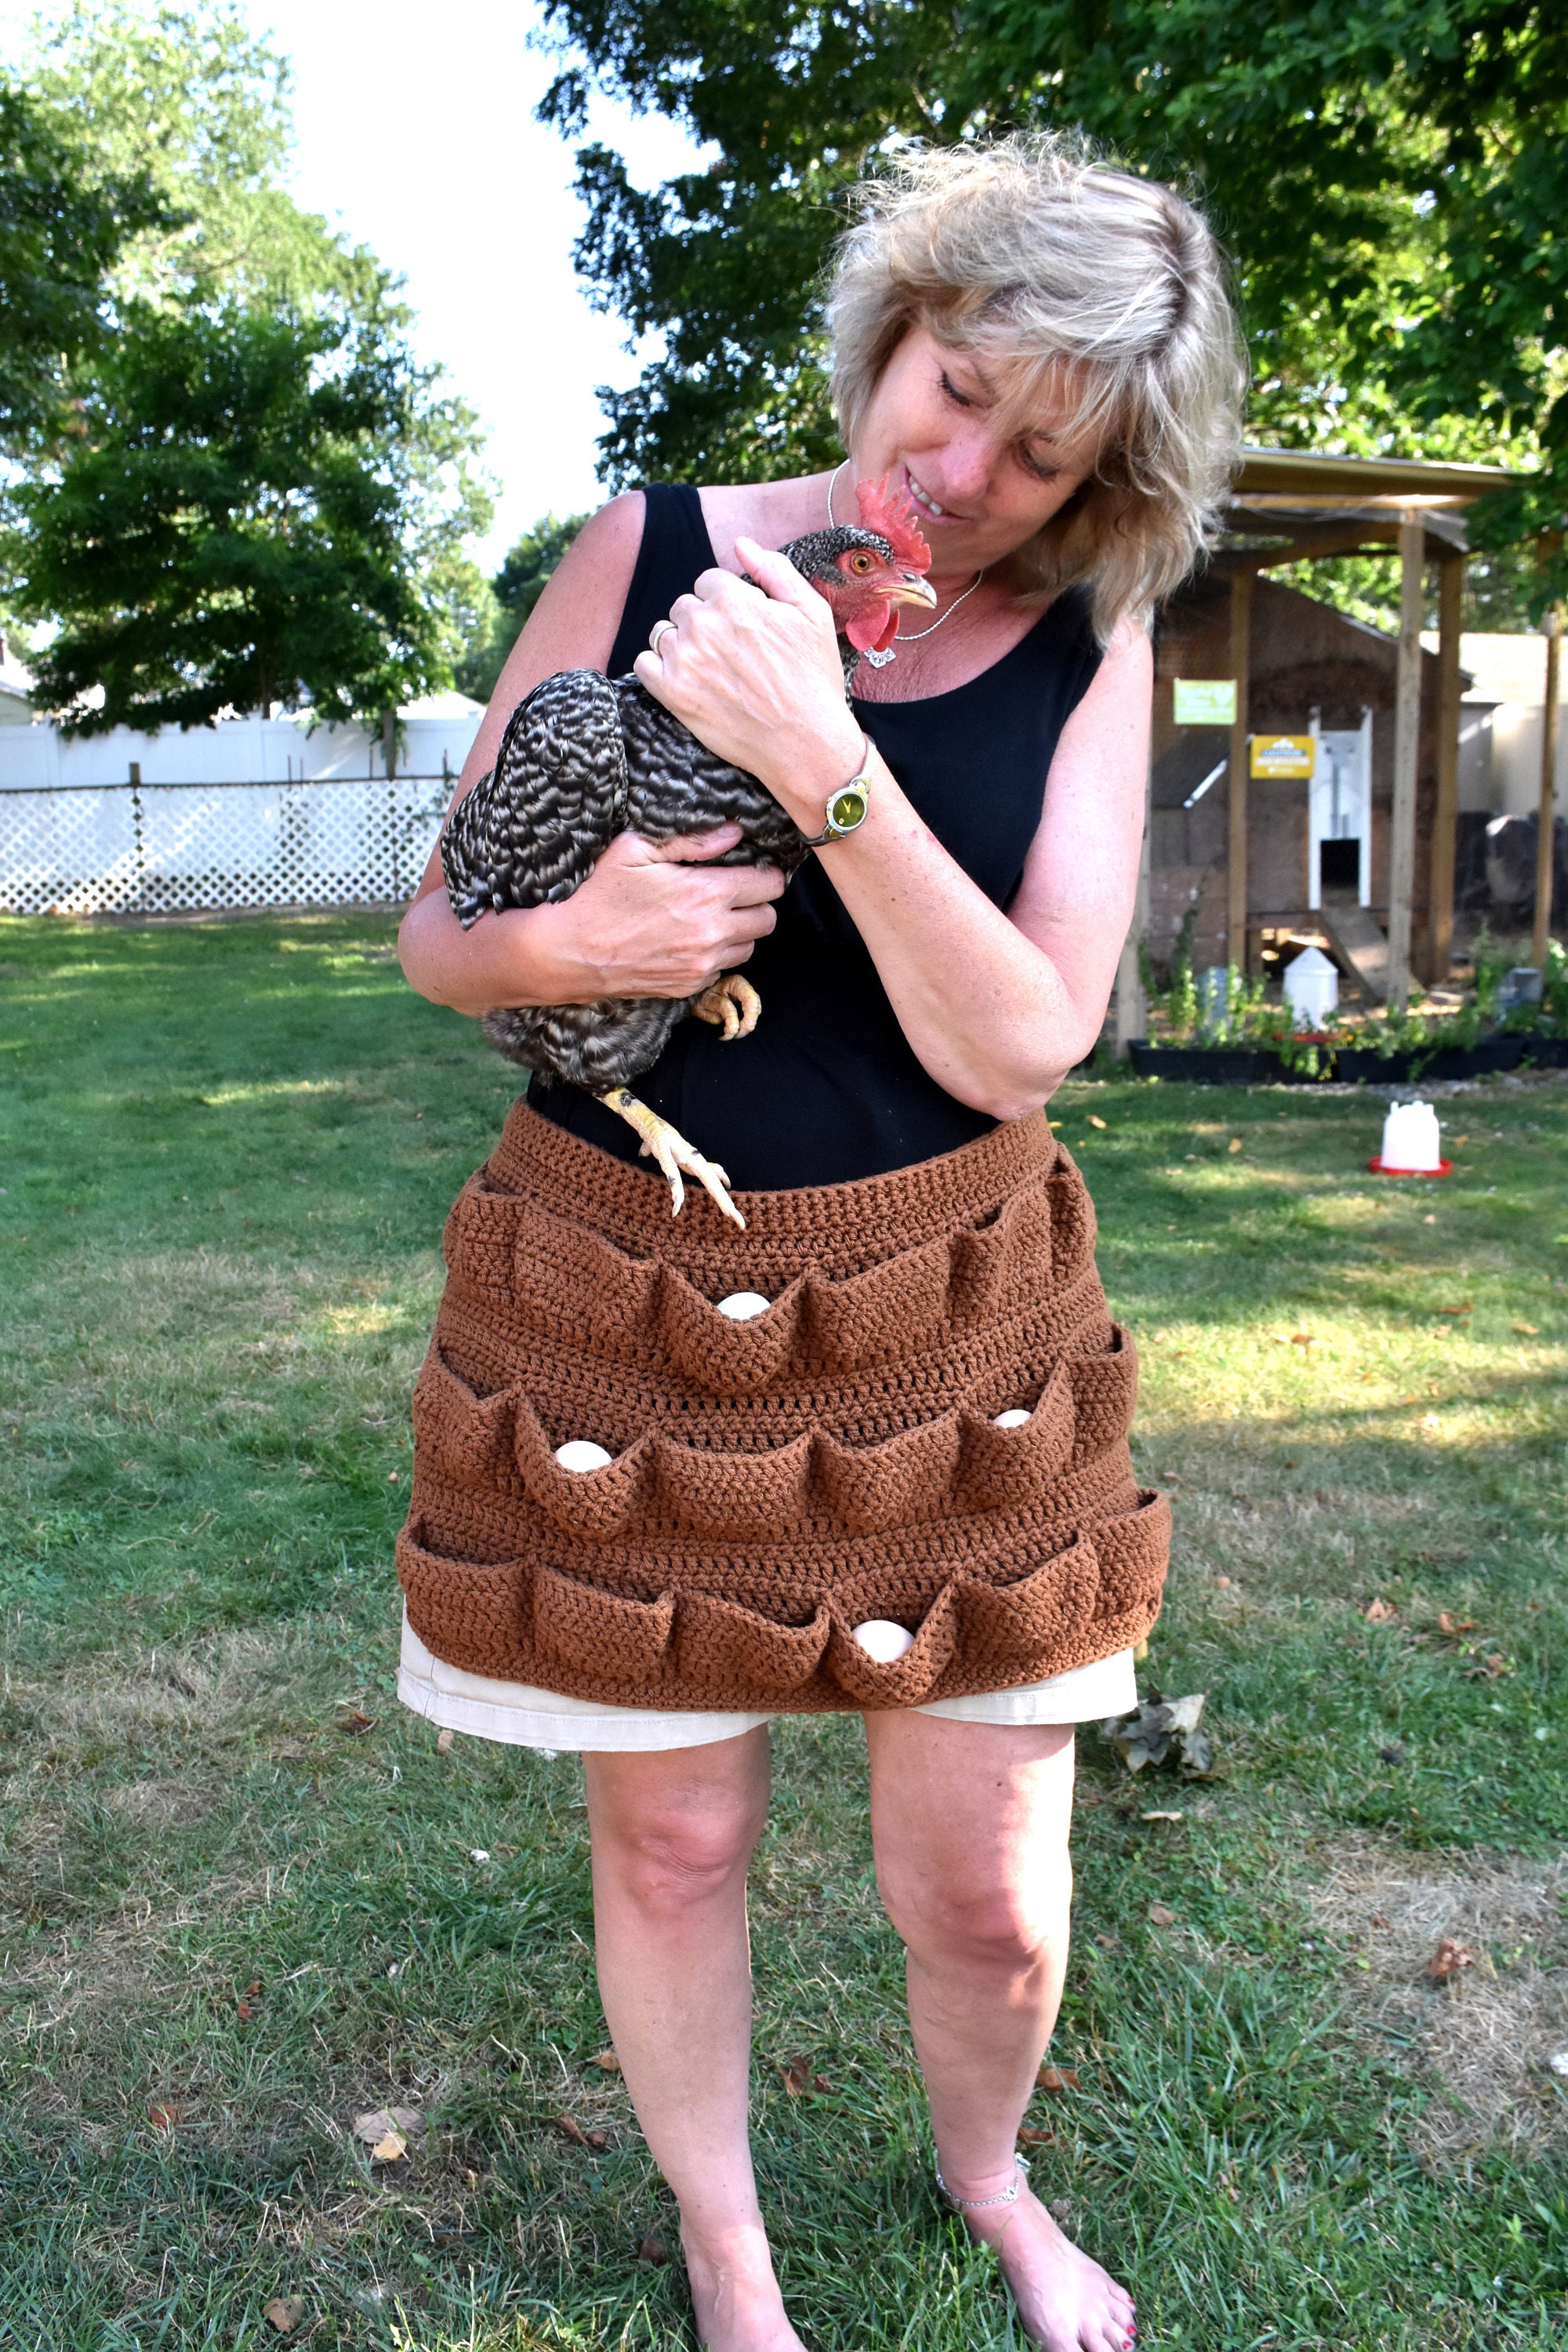 This Crocheted Egg Apron is the Genius Accessory We Didn't Know We Needed